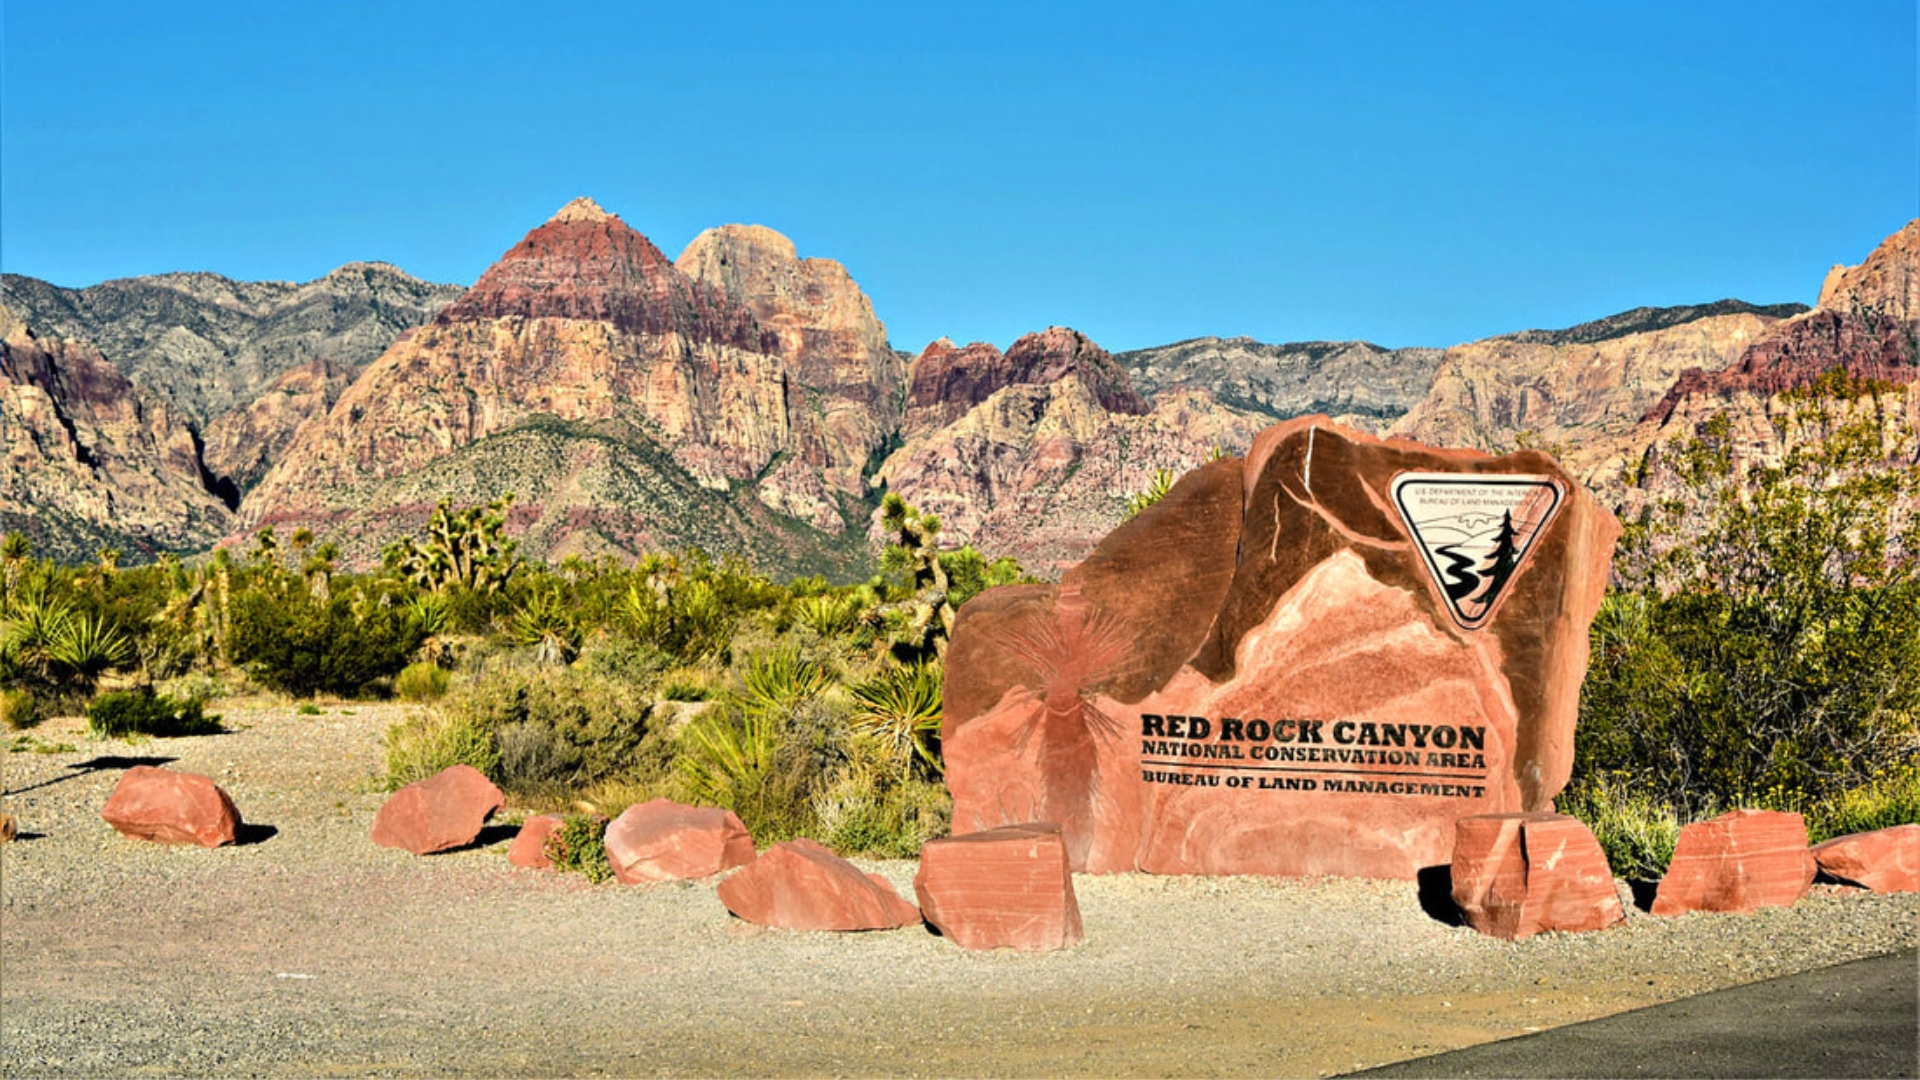 [JADE] Red Rock Canyon National Conservation Area